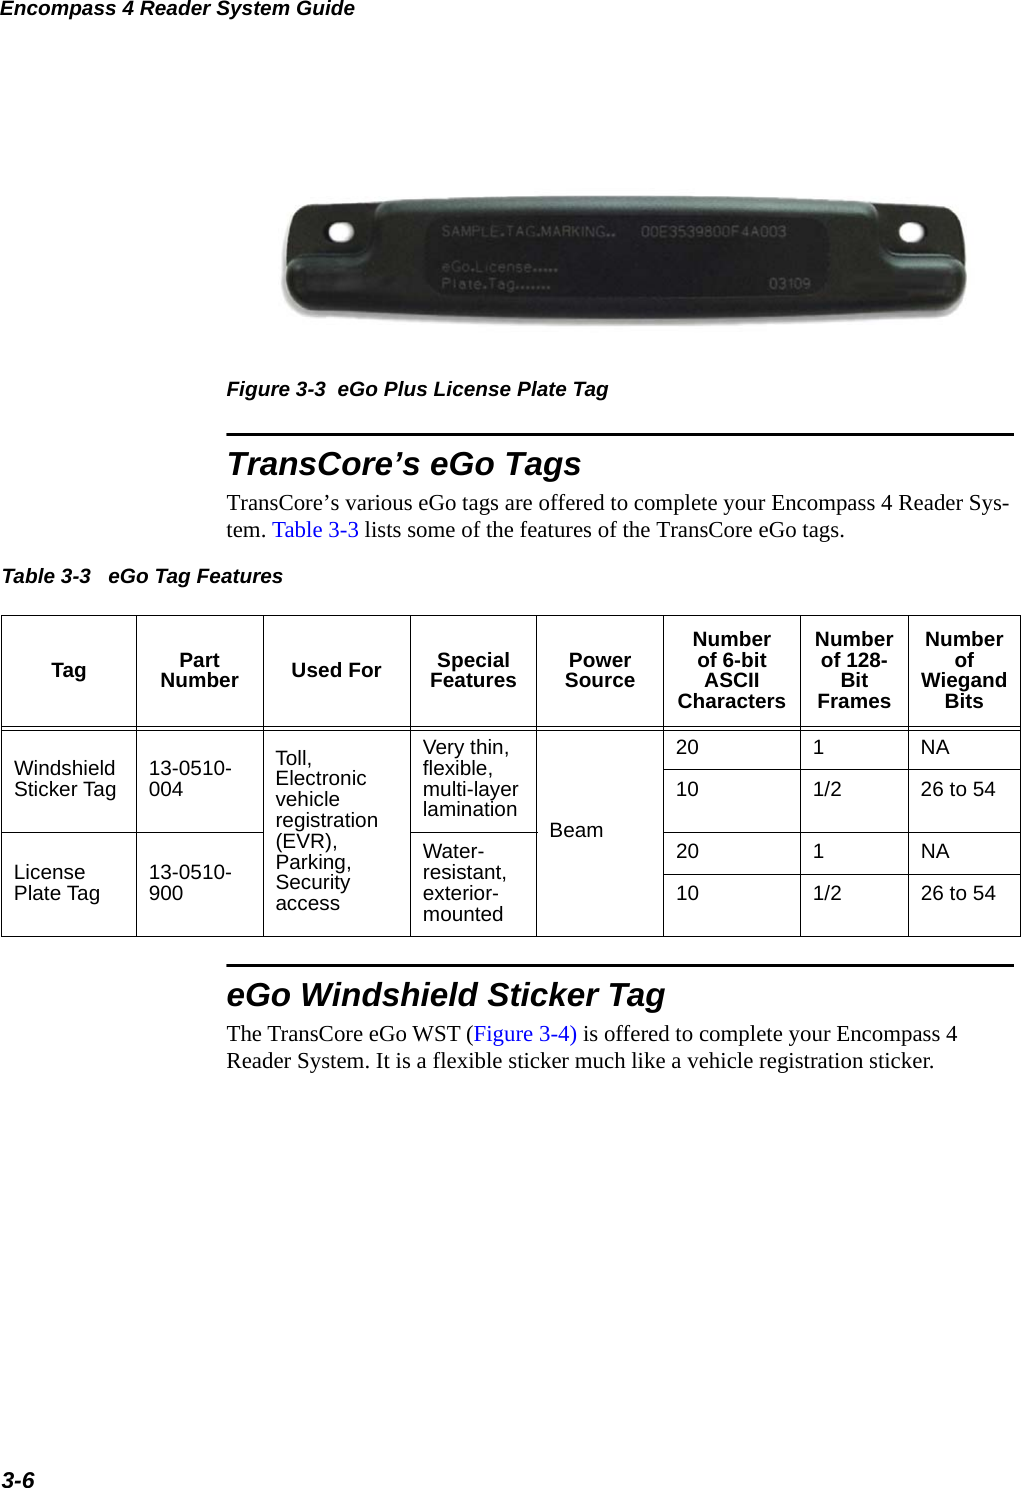 Encompass 4 Reader System Guide3-6Figure 3-3  eGo Plus License Plate TagTransCore’s eGo TagsTransCore’s various eGo tags are offered to complete your Encompass 4 Reader Sys-tem. Table 3-3 lists some of the features of the TransCore eGo tags.Table 3-3  Tag Part Number Used For Special Features Power SourceNumber of 6-bit ASCII CharactersNumber of 128-Bit FramesNumber of Wiegand BitsWindshield Sticker Tag 13-0510-004Toll, Electronic vehicle registration (EVR),     Parking, Security accessVery thin, flexible, multi-layer lamination Beam20 1NA10 1/2 26 to 54License Plate Tag 13-0510-900Water-resistant, exterior-mounted20 1NA10 1/2 26 to 54 eGo Tag FeatureseGo Windshield Sticker TagThe TransCore eGo WST (Figure 3-4) is offered to complete your Encompass 4 Reader System. It is a flexible sticker much like a vehicle registration sticker.